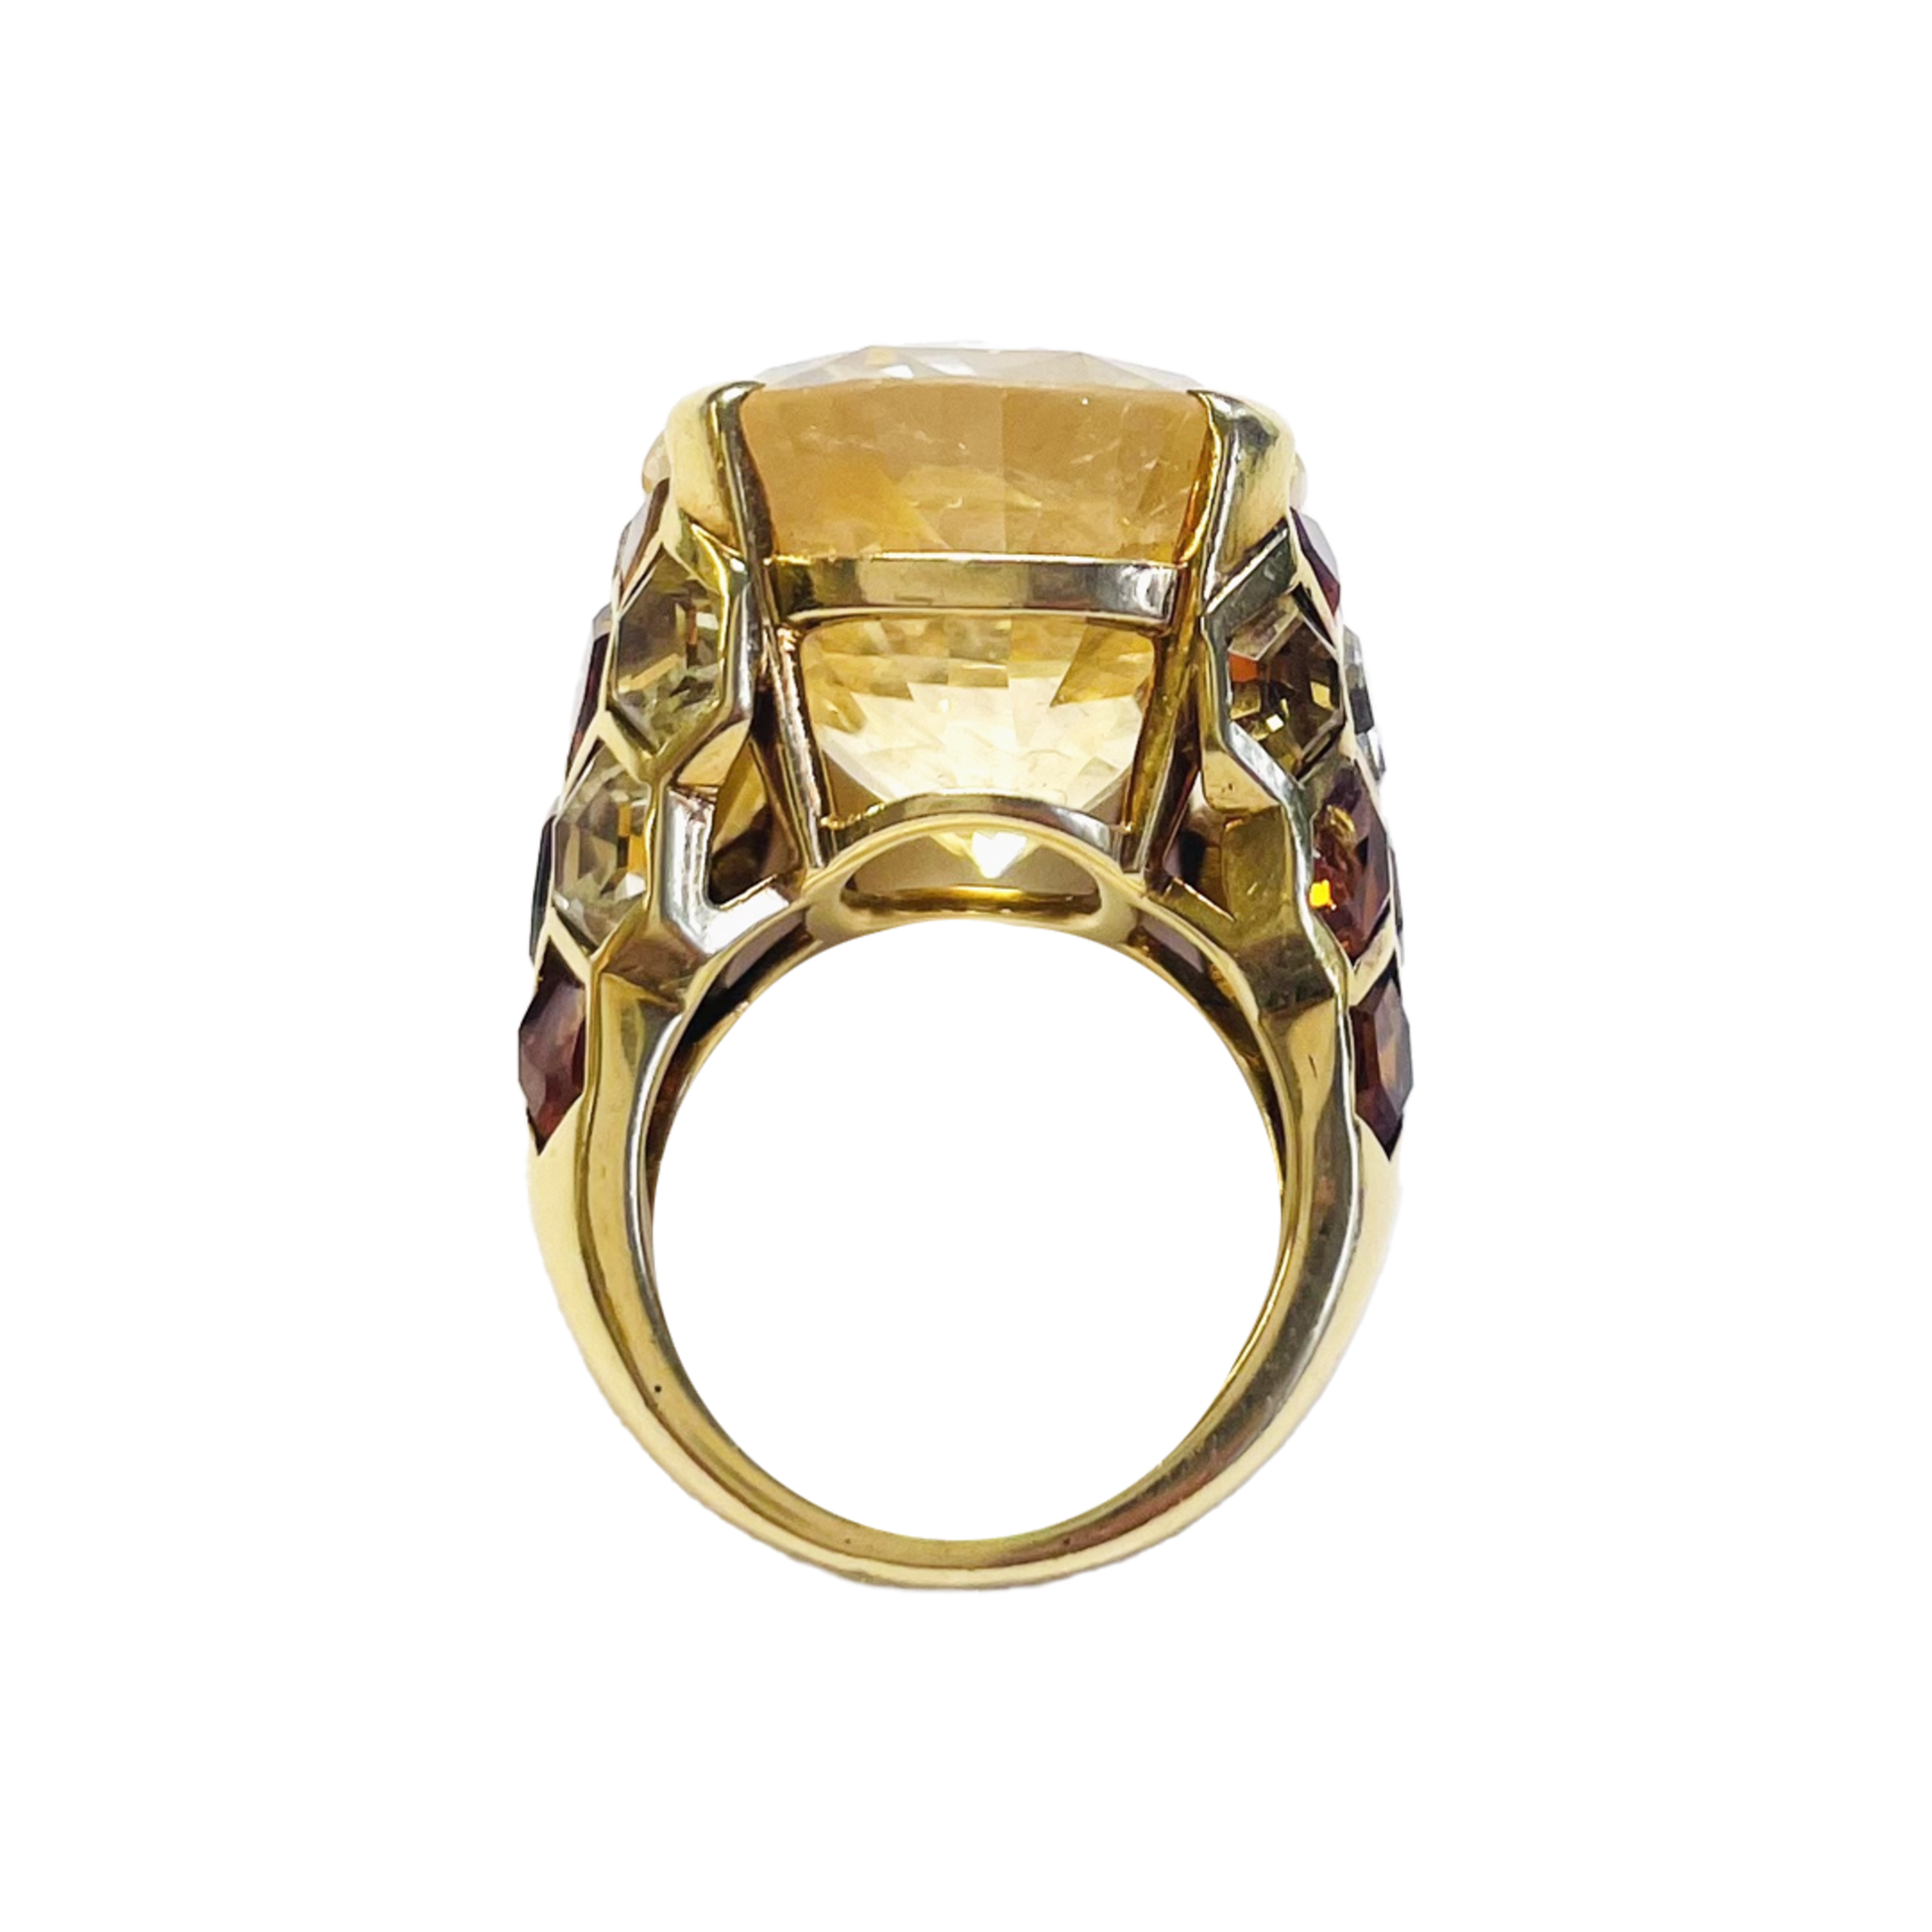 Suzanne Belperron French 1940s 18KT Yellow Gold Yellow Sapphire & Citrine Ring profile